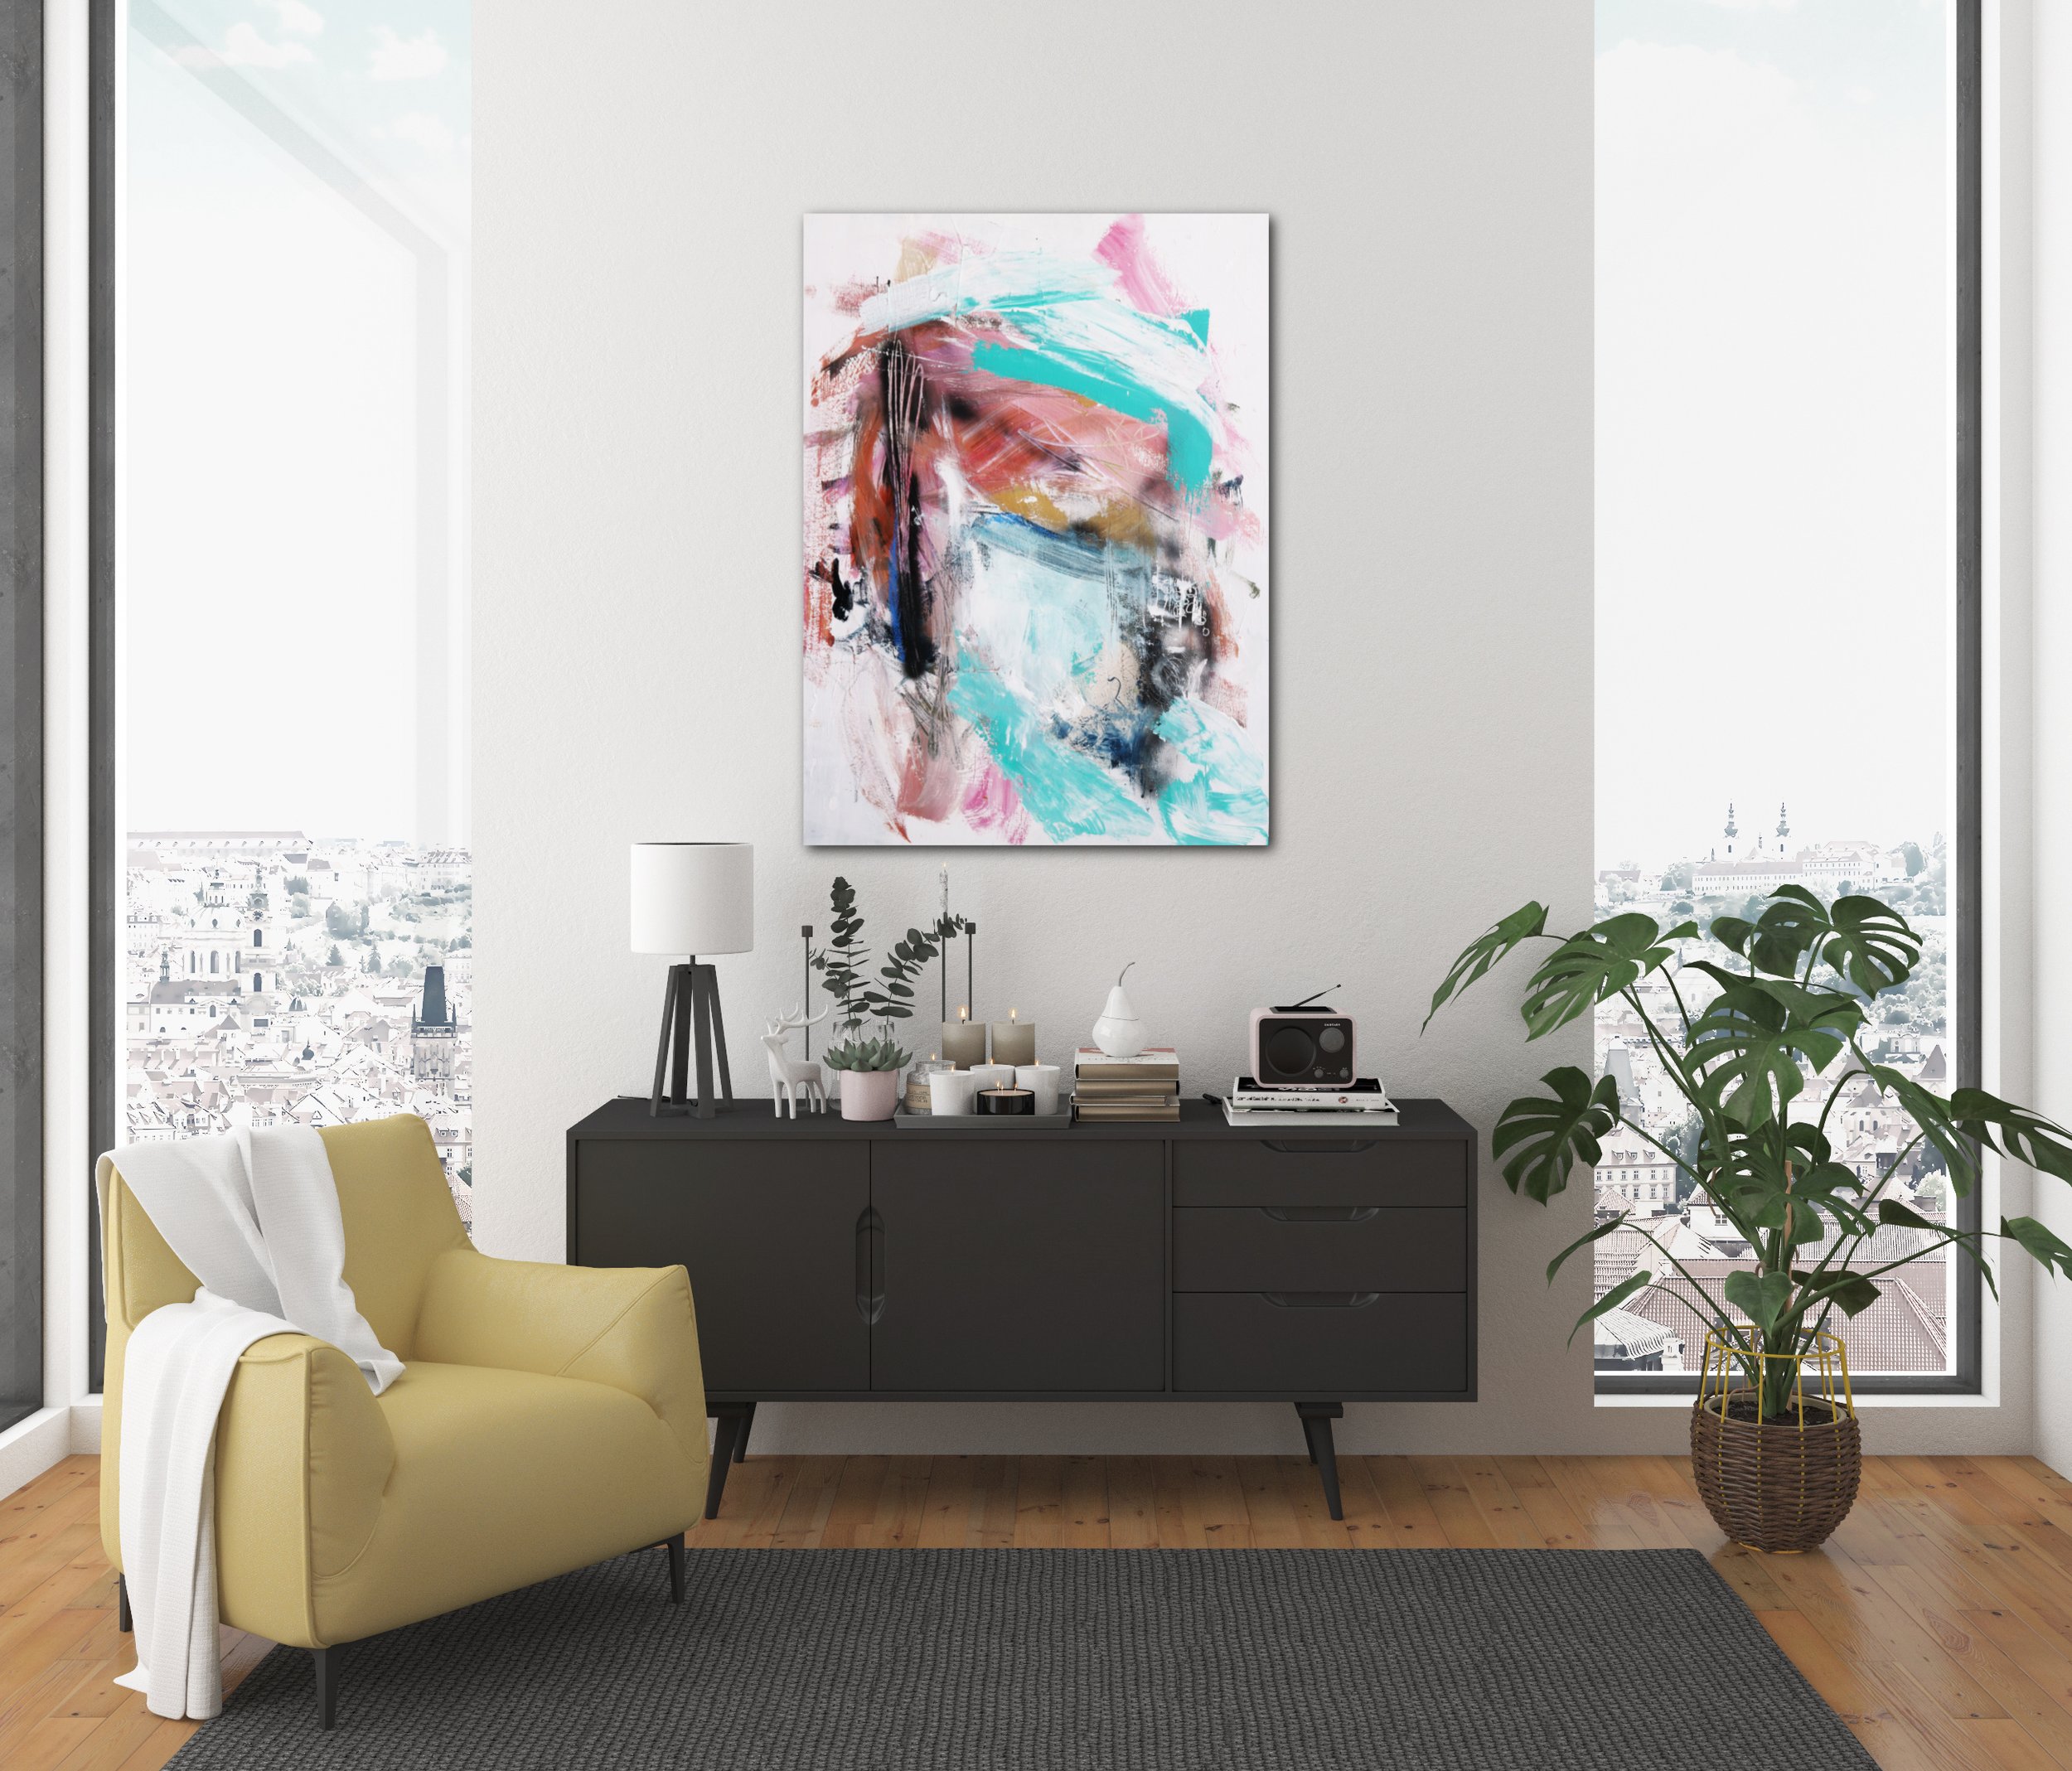 02_Abstract painting by Nikol Wikman in home decor.jpg